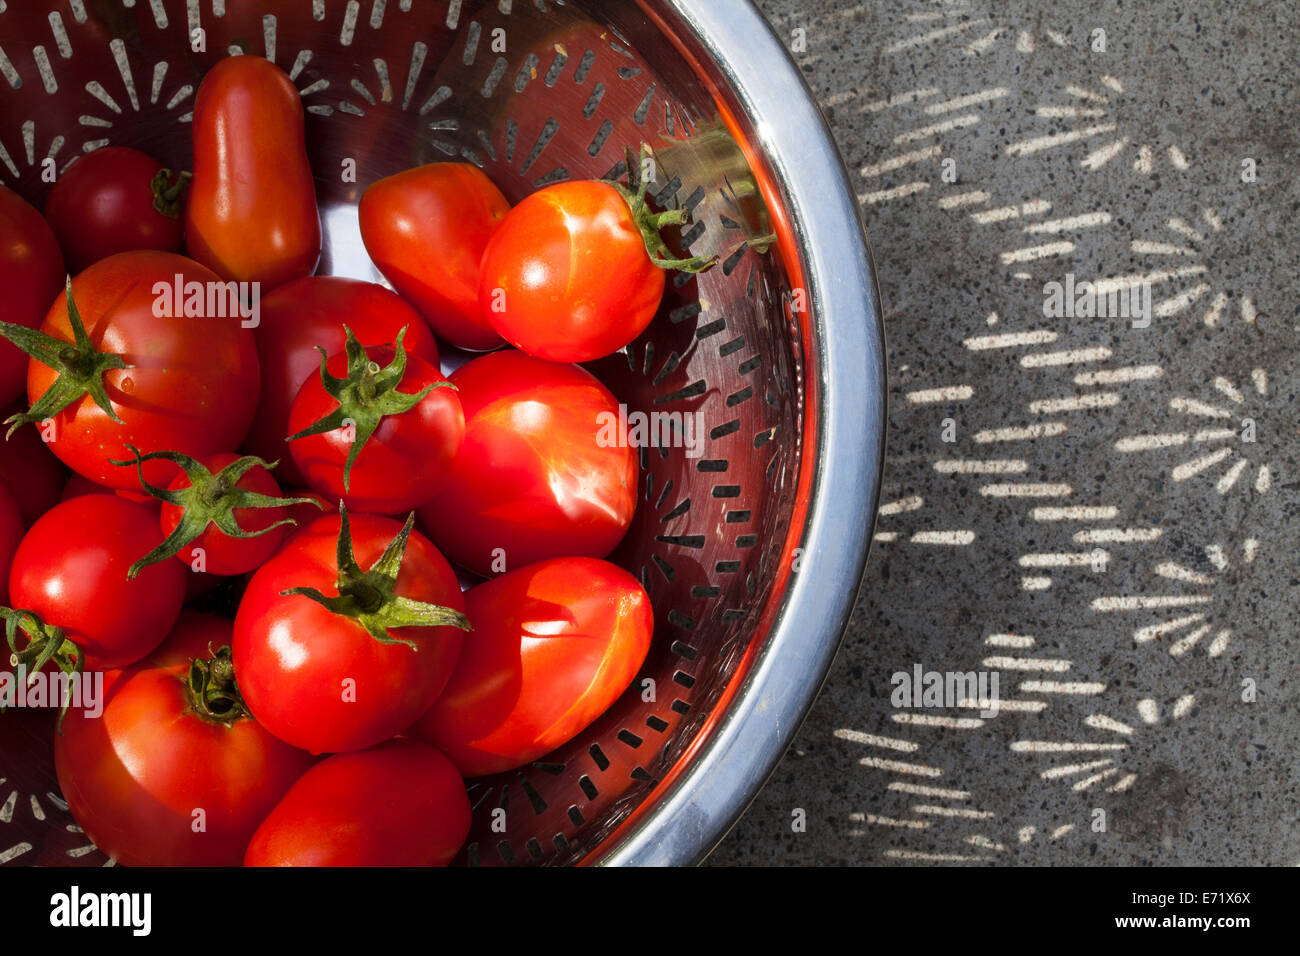 Red tomatoes in a colander, Marin County, California, USA Stock Photo